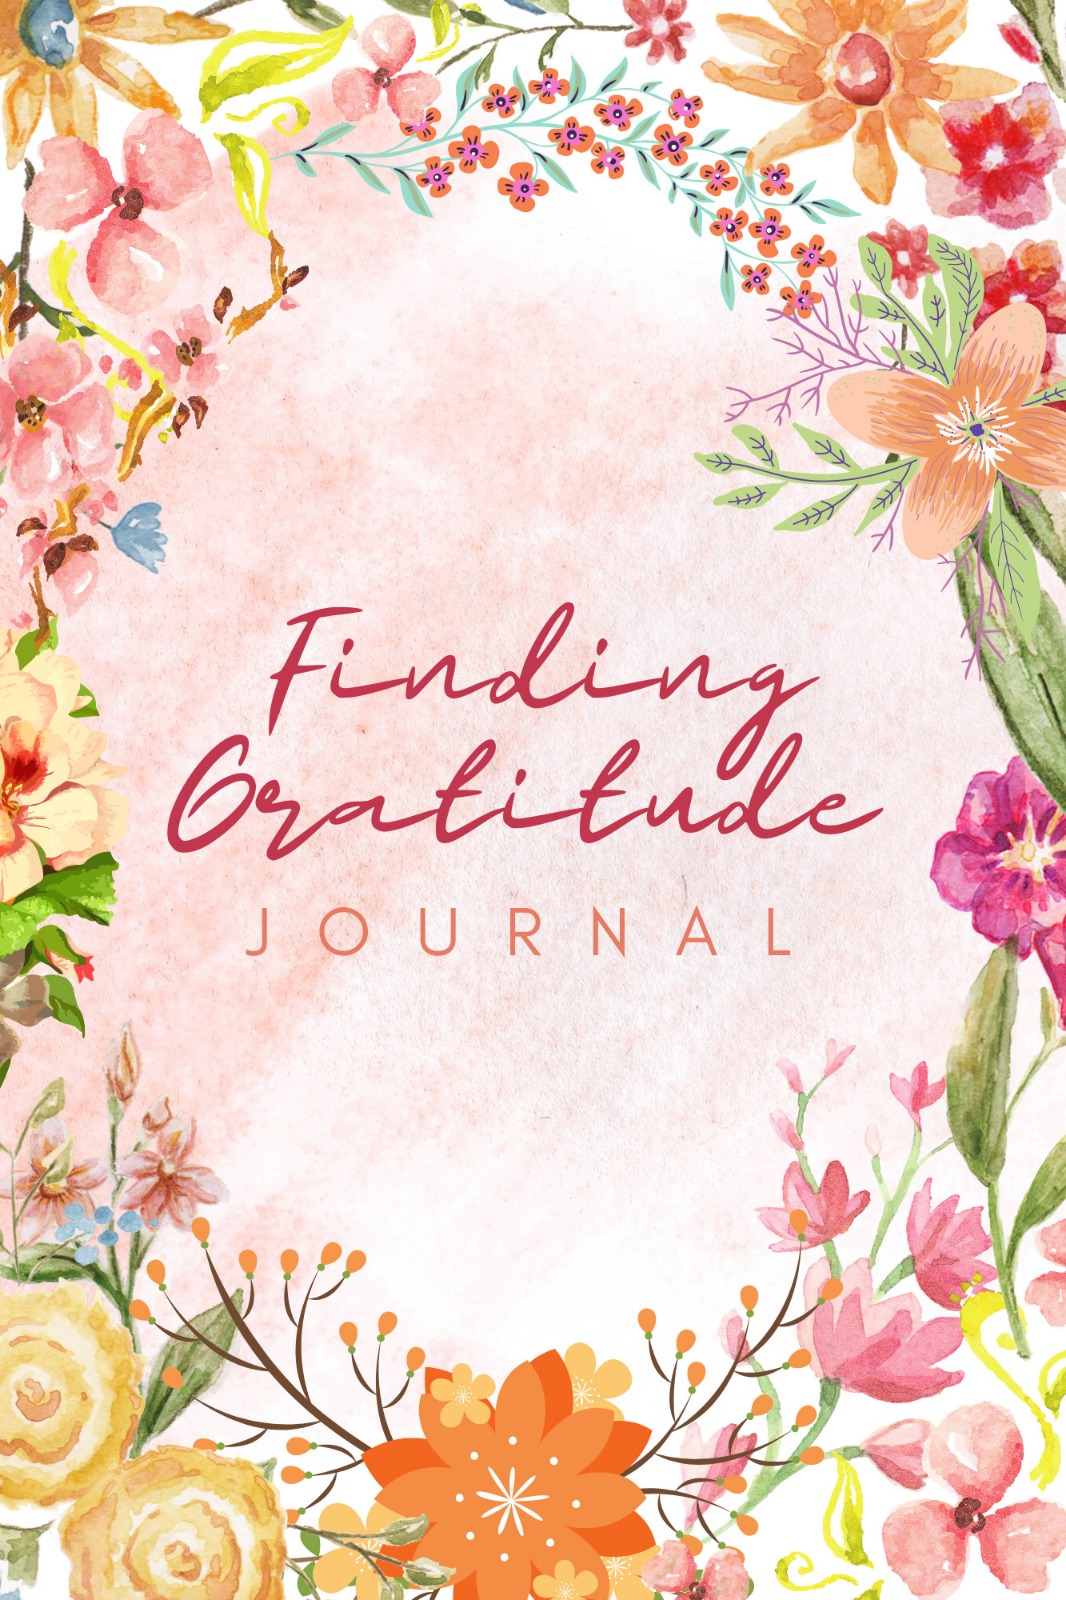 FREE: Finding Gratitude Journal by Evelyn Taylor